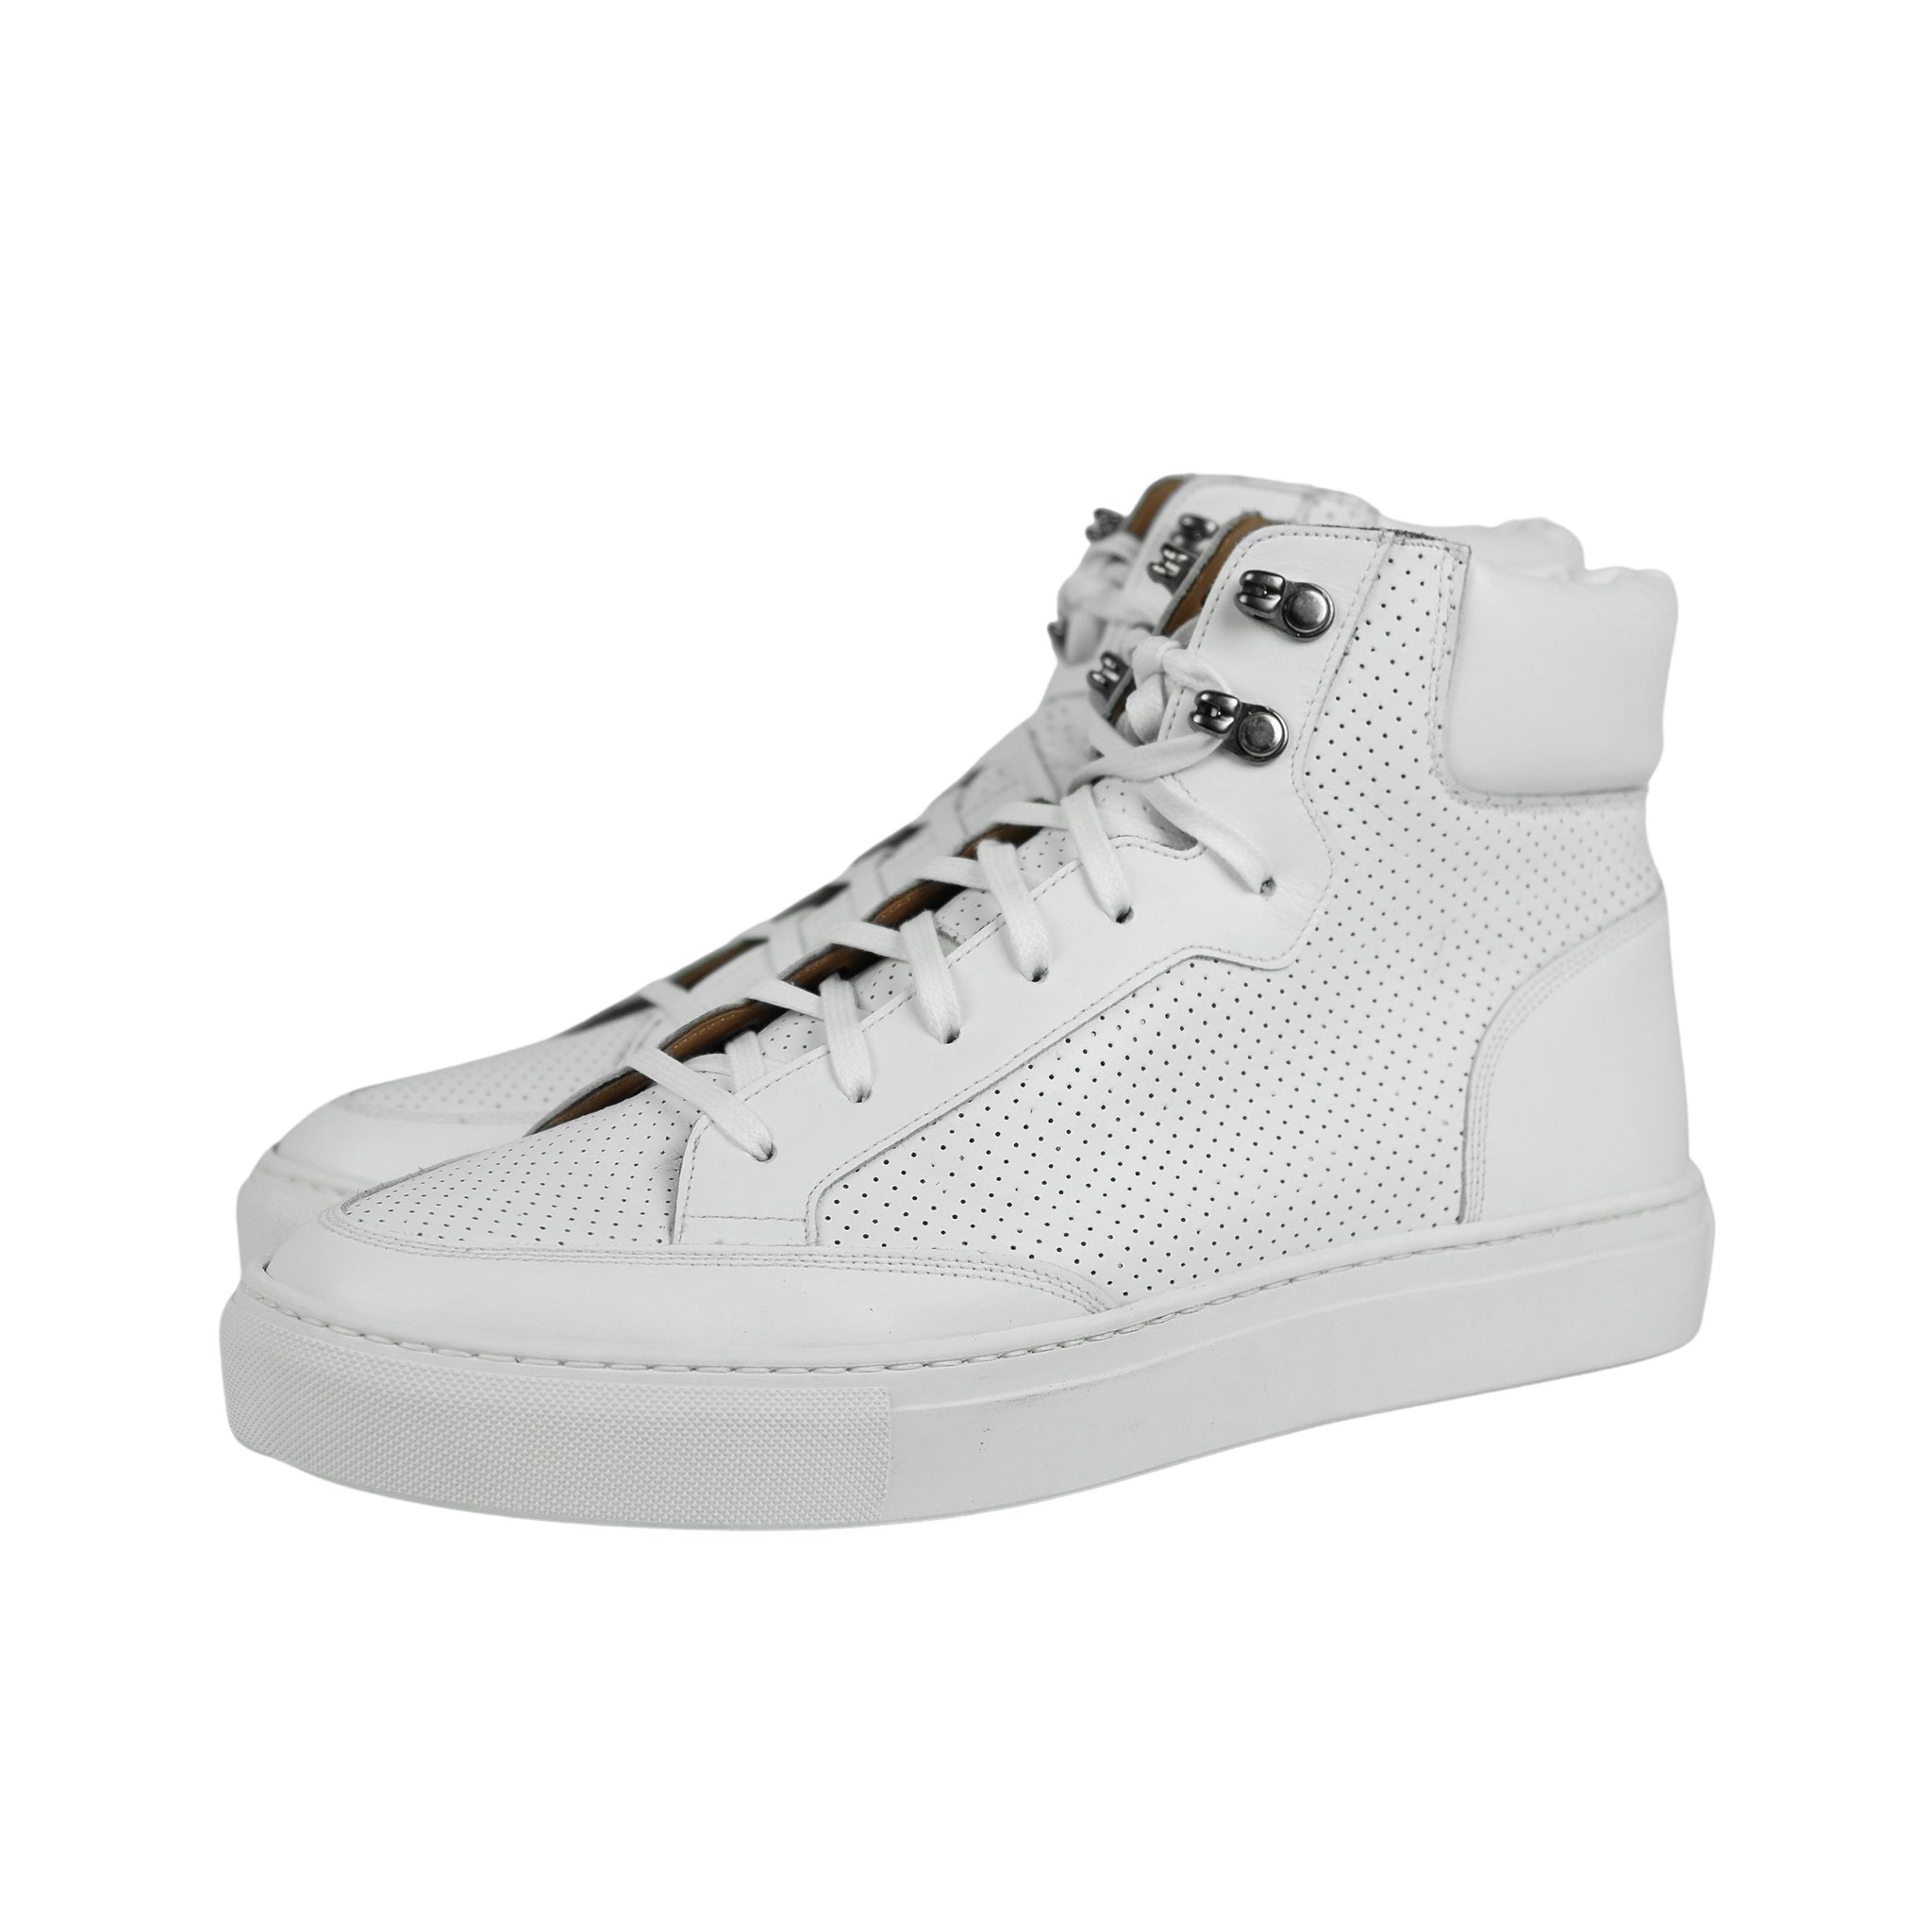 Louis Suede-Trimmed Perforated Leather High-Top Sneakers